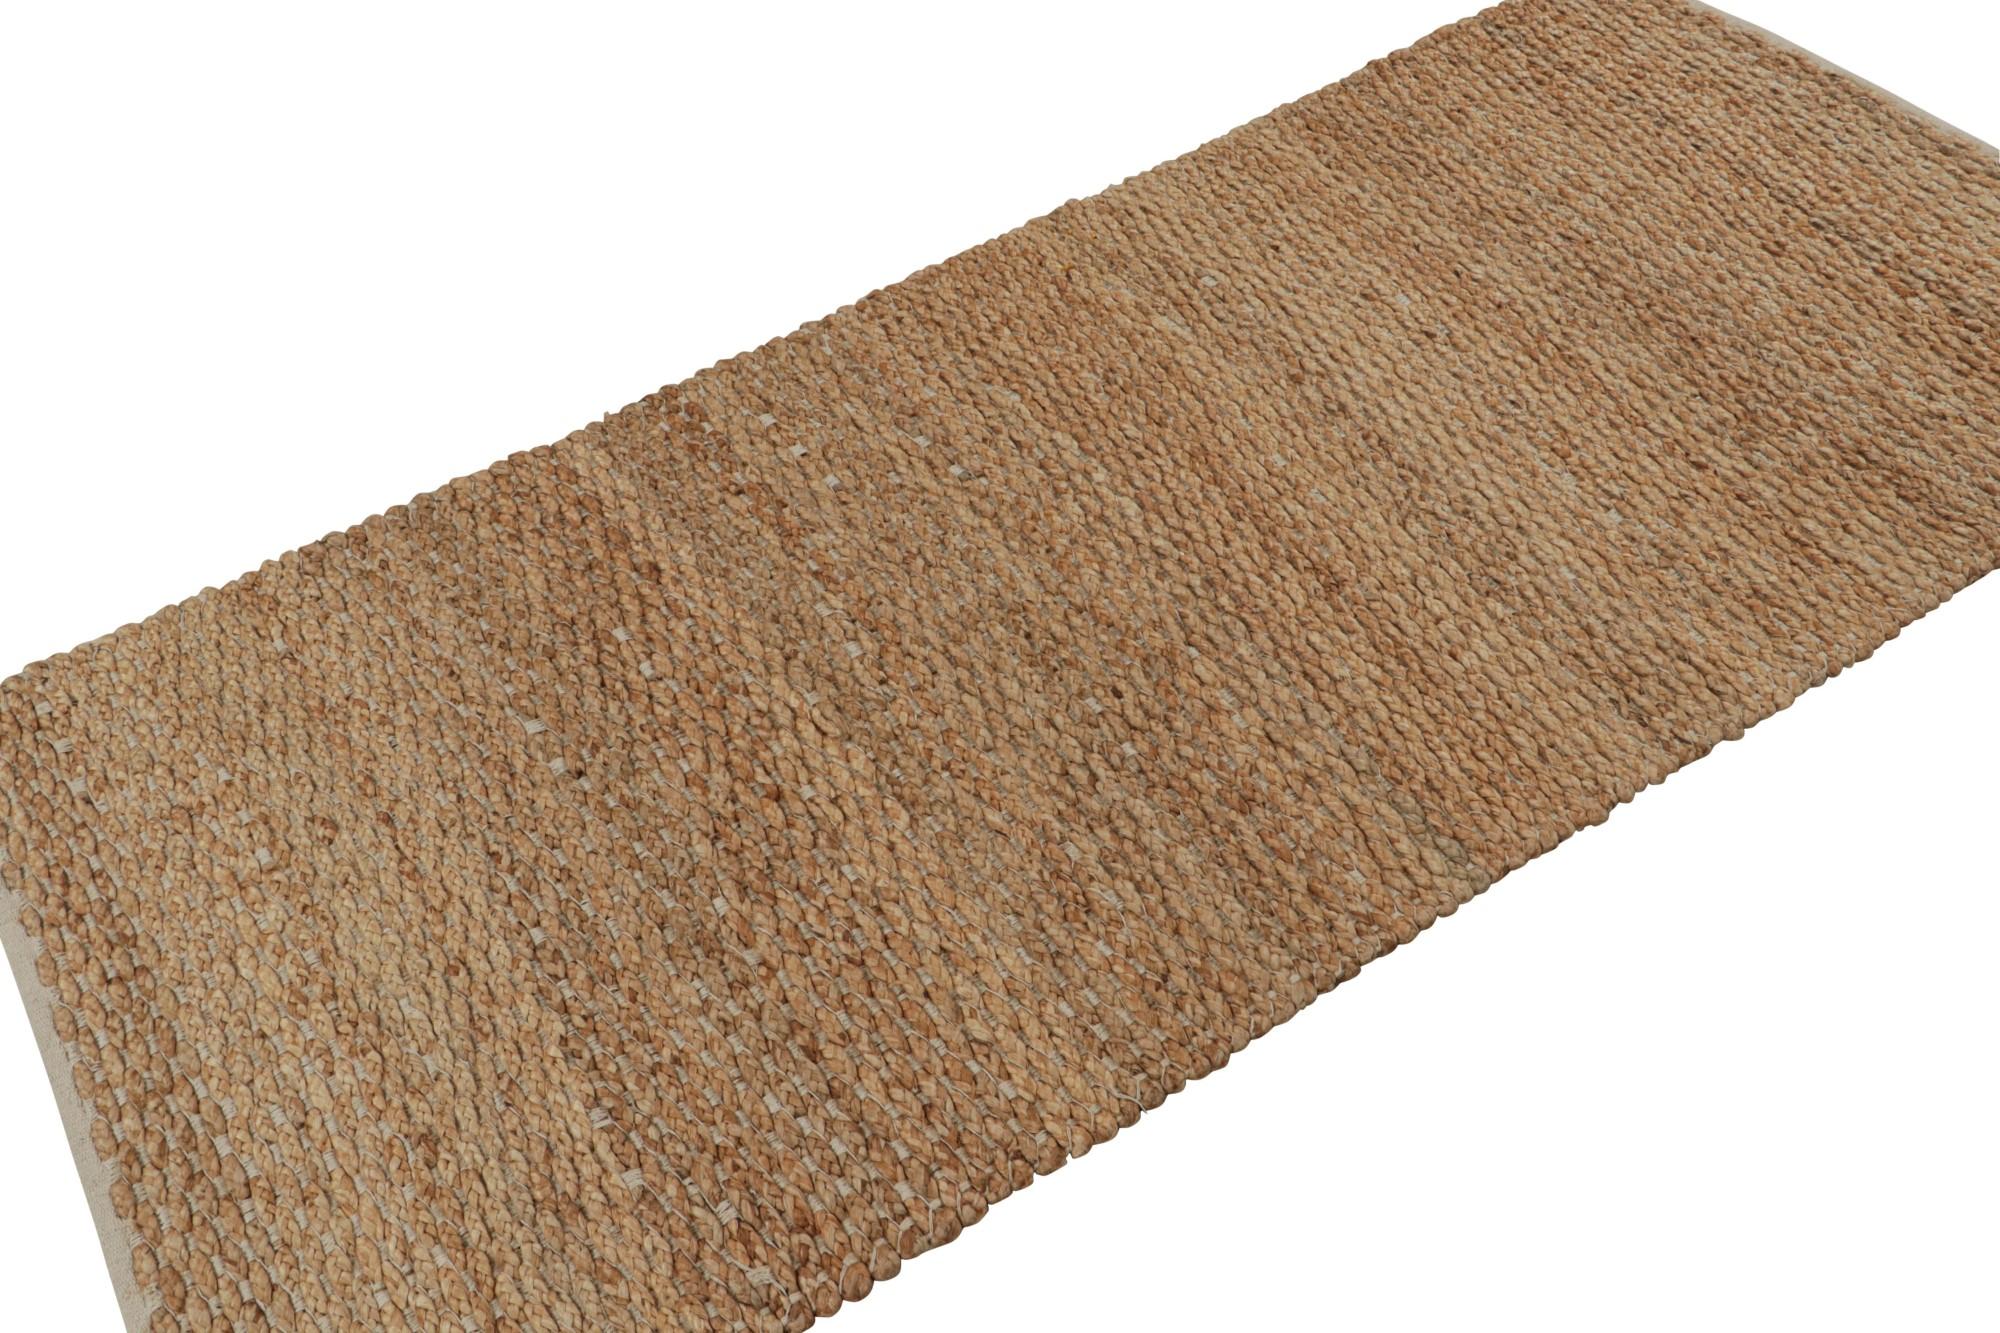 Handwoven in jute, this 3x7 modern flatweave runner rug in beige/brown, is a simple textural piece with a natural luster. 

On the Design:

Connoisseurs will appreciate the natural materials, particularly eco-friendly and sustainable jute fiber that